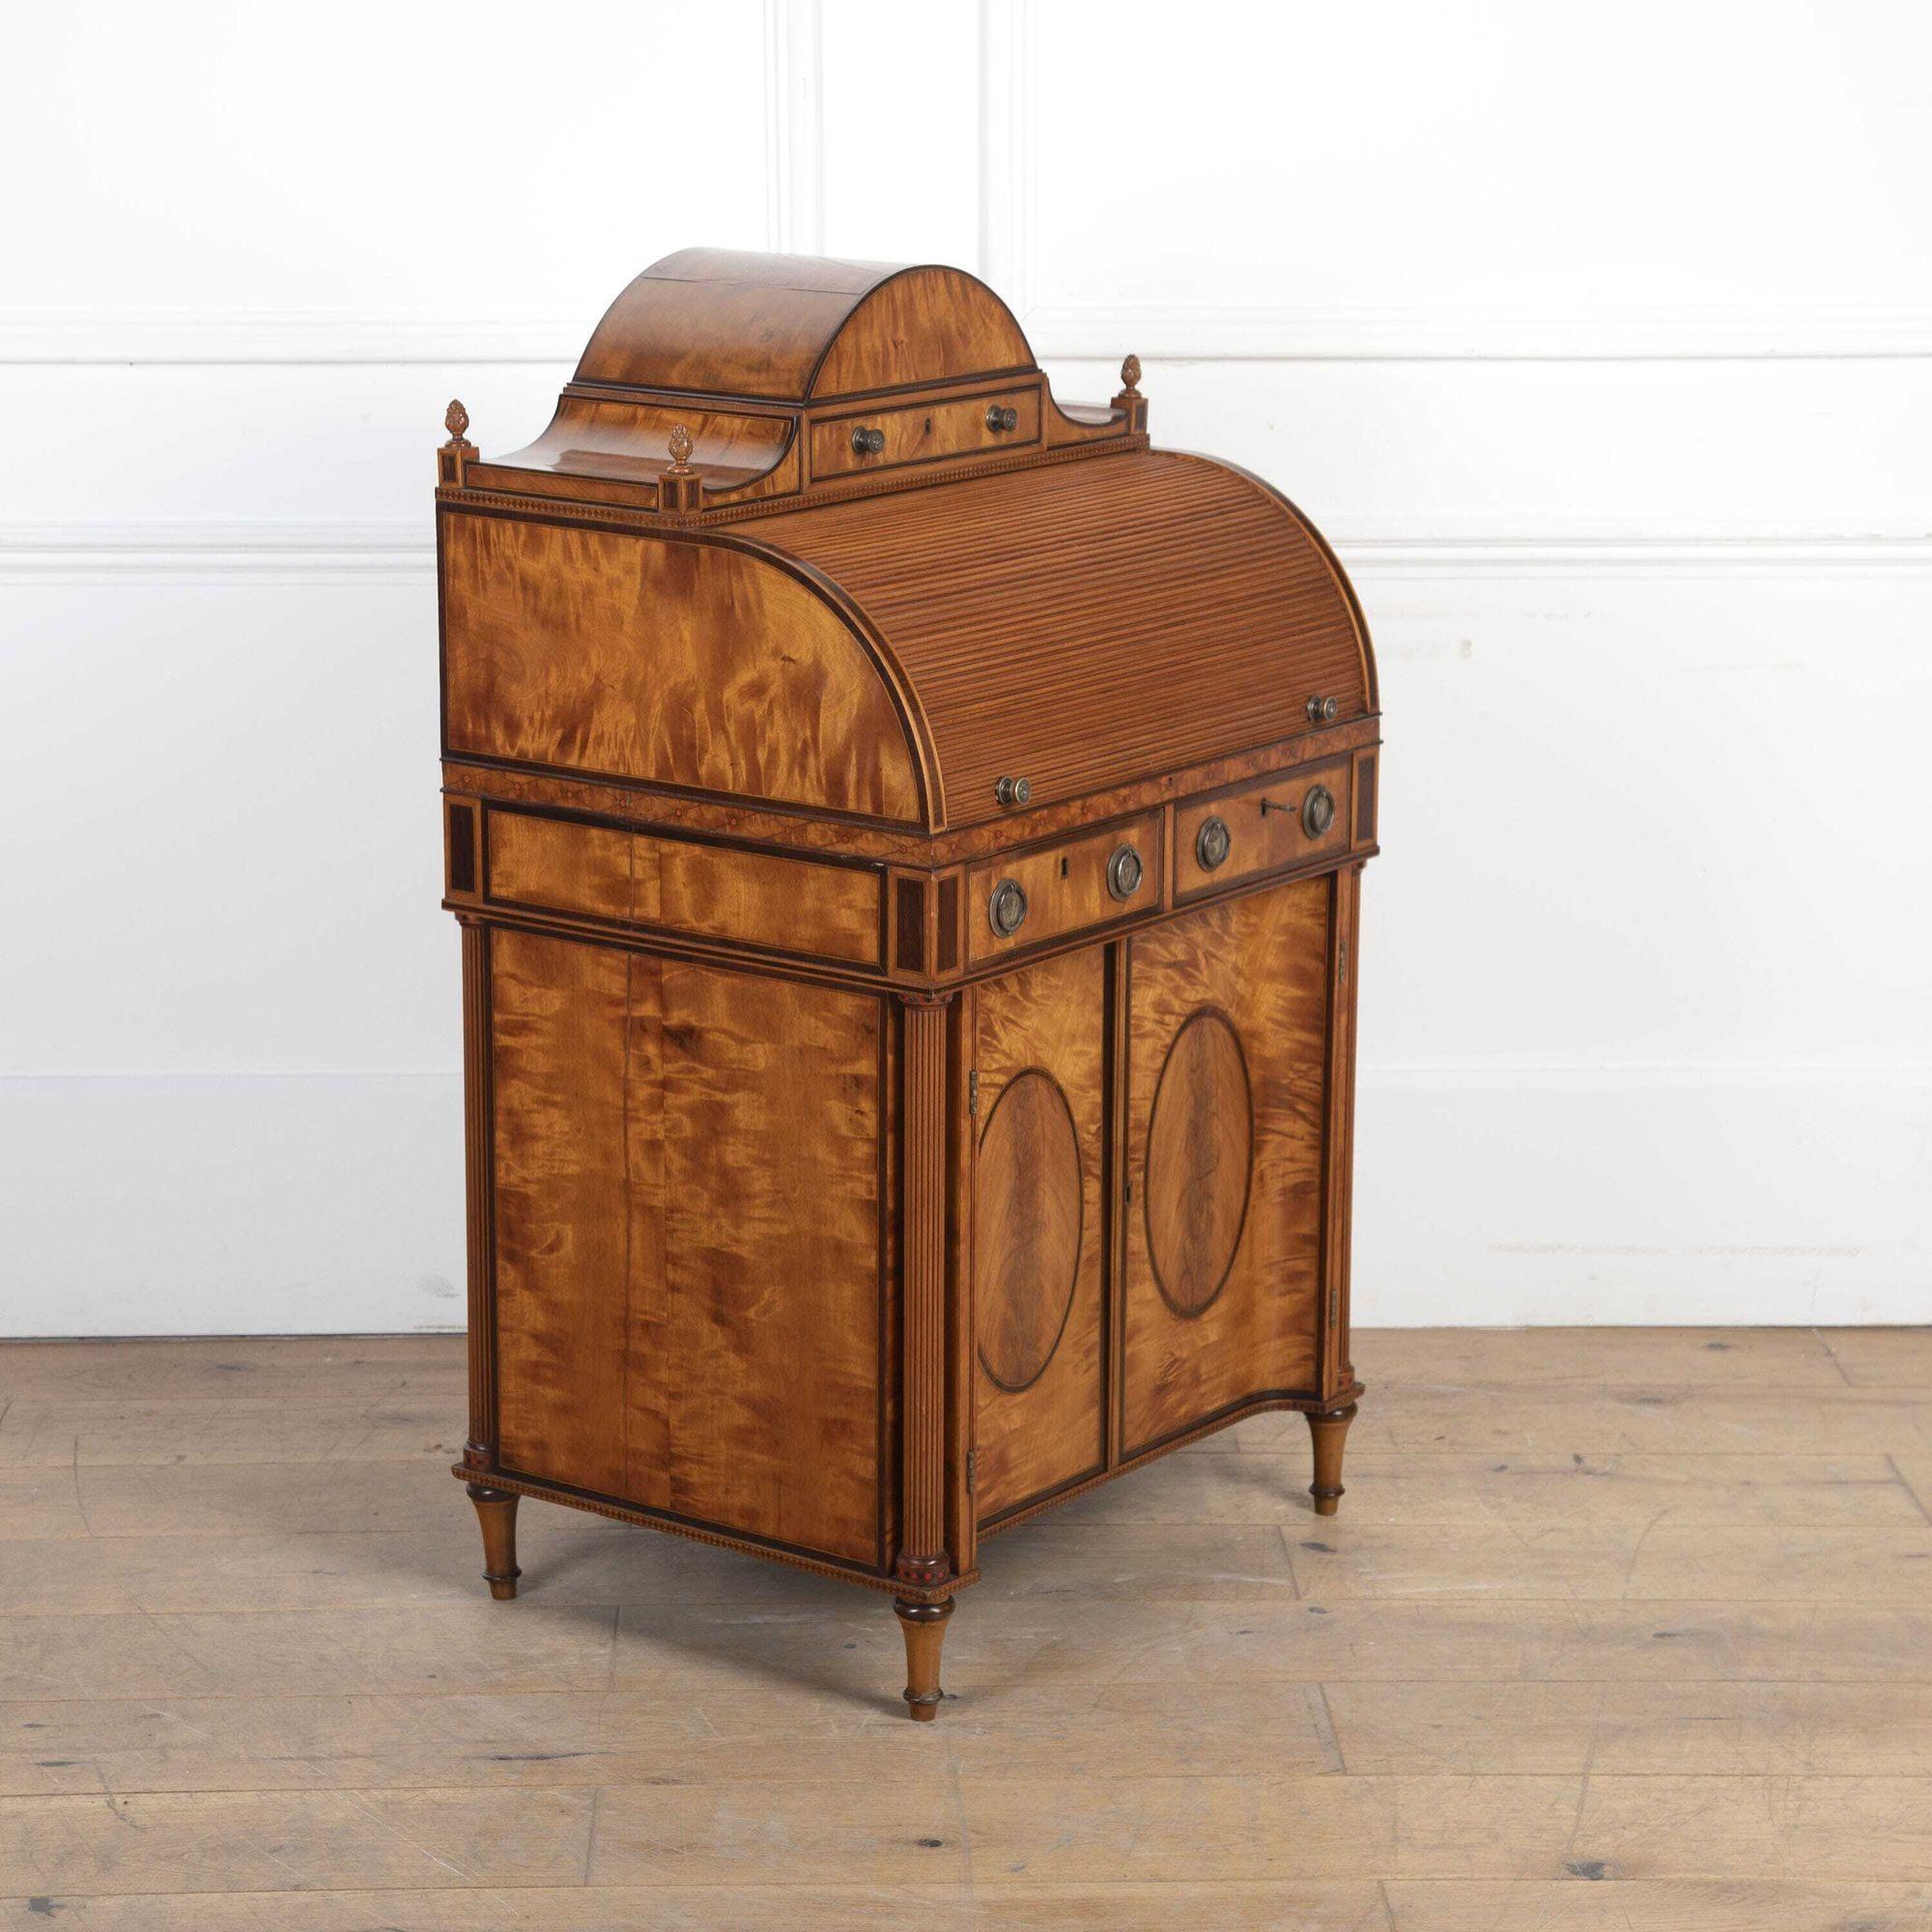 A stunning George III Sheraton Period lady's small tambour fronted desk.
Constructed from exceptional figured satinwood with rosewood crossbanding between boxwood line inlay.
The domed top housing a useful drawer with lions head pulls and each